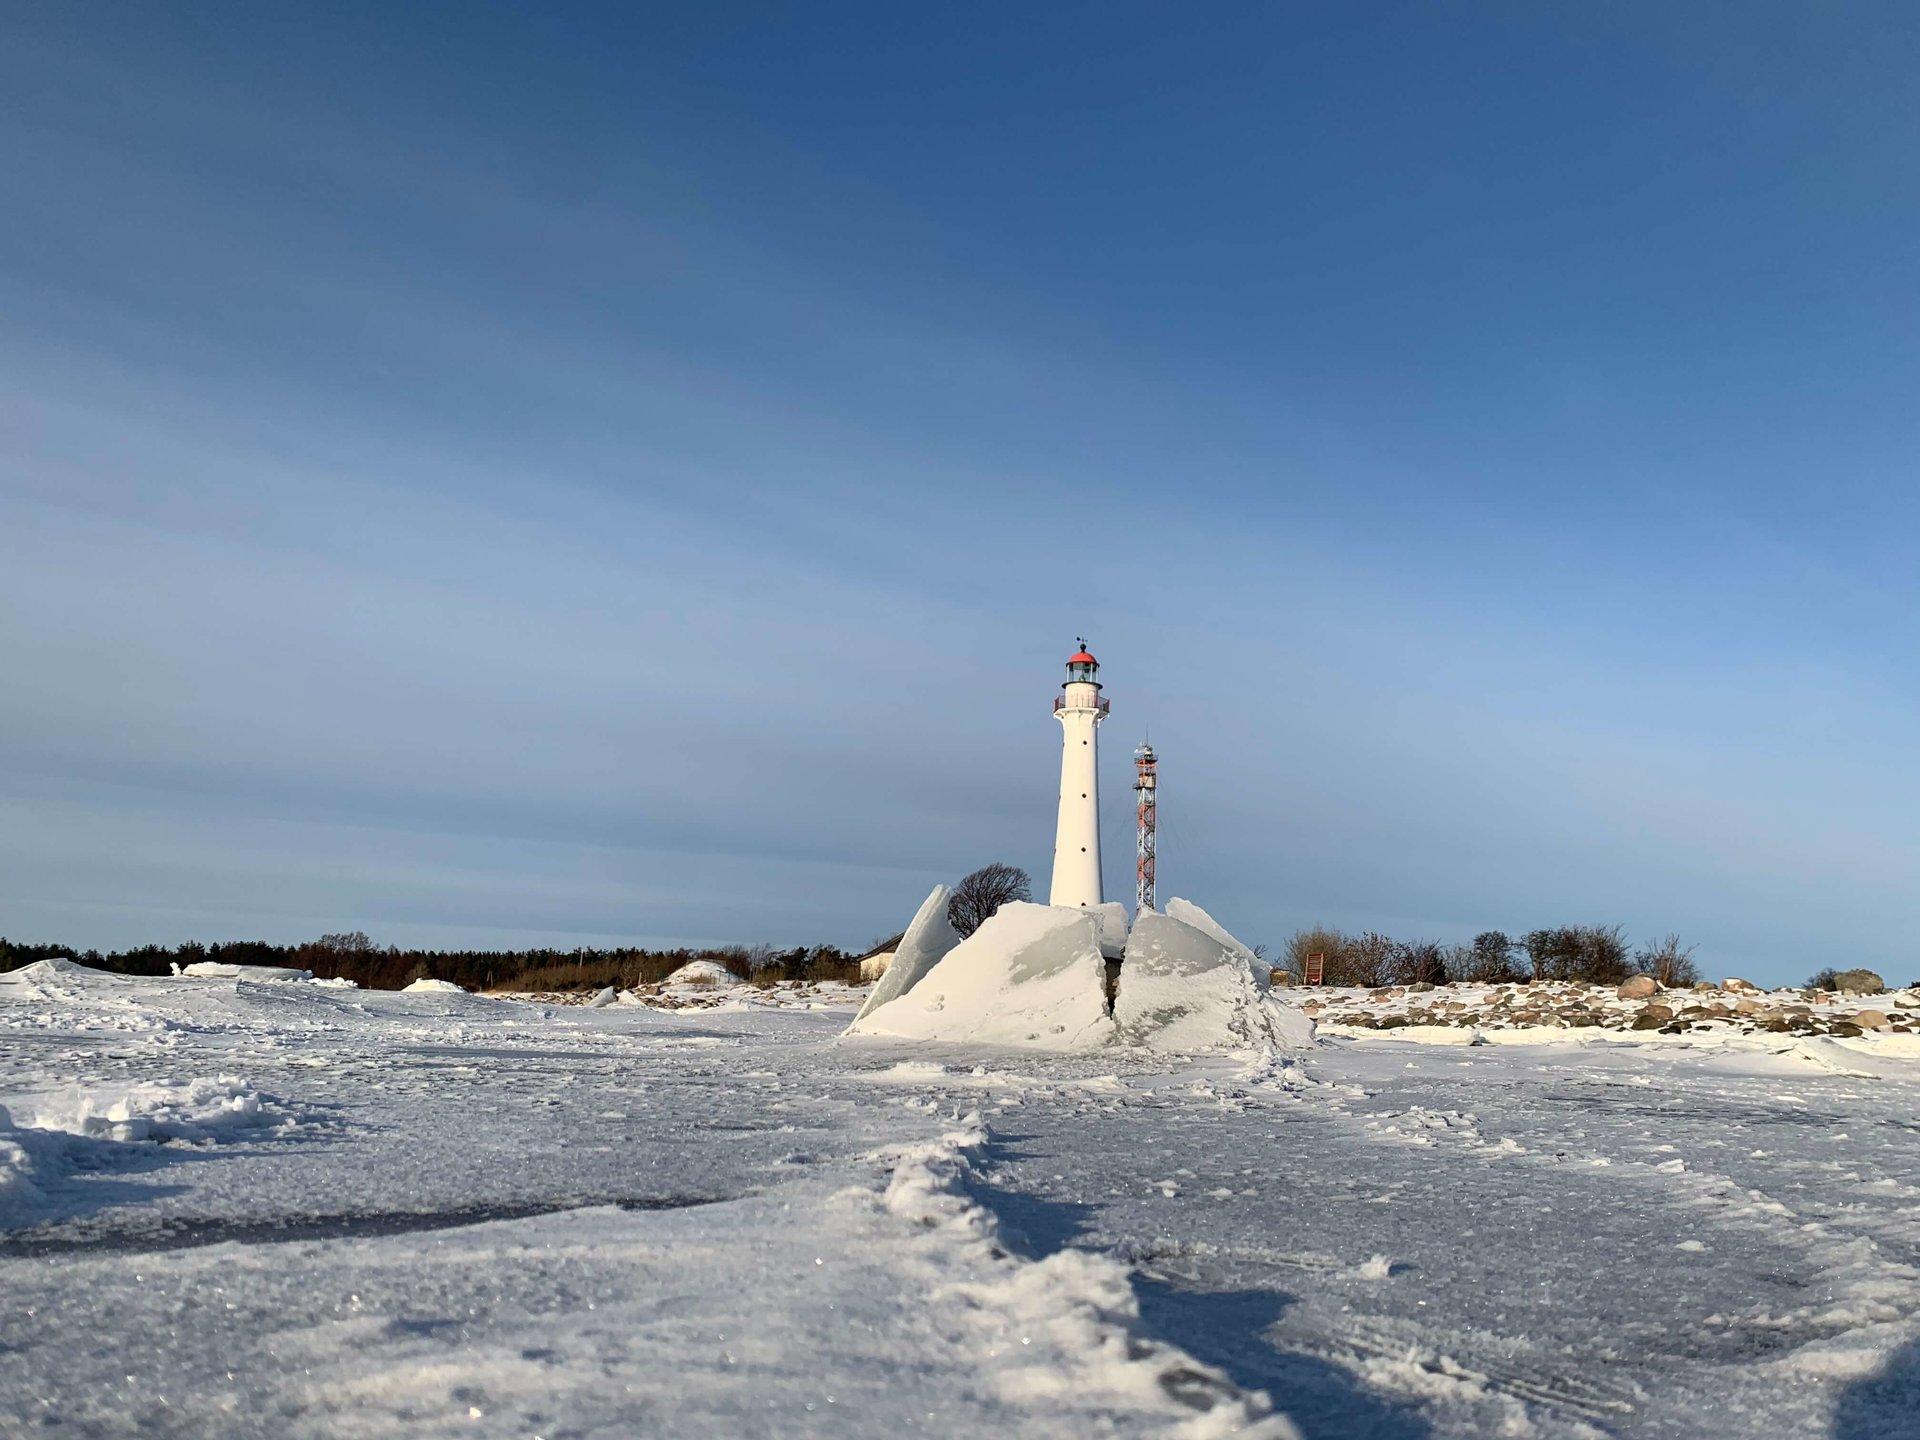 Kihnu in winter, the icy lighthouse